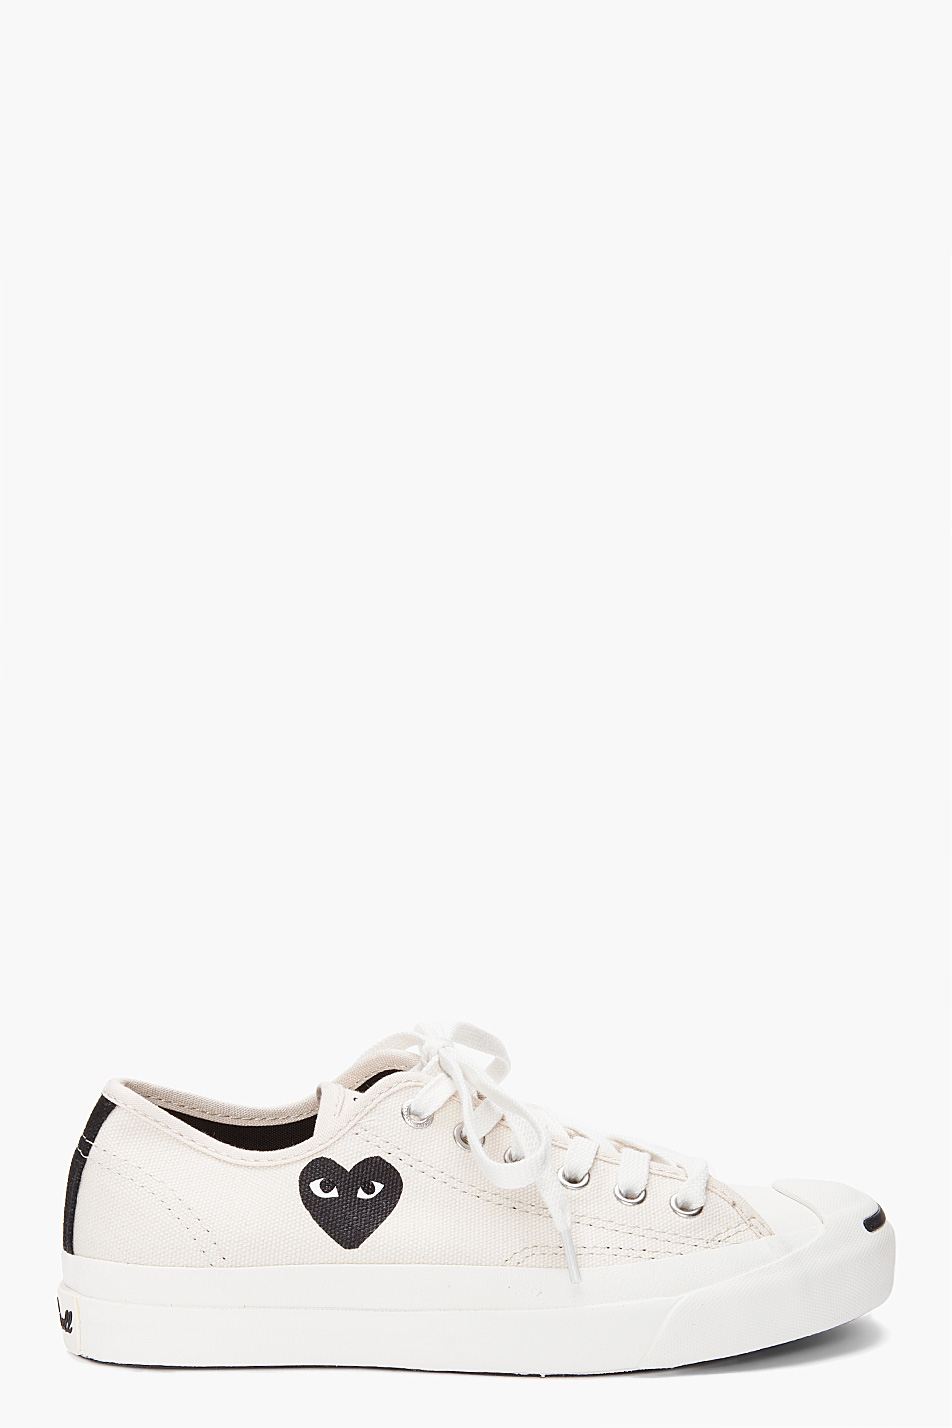 Play Comme des Garçons Converse Jack Purcell Sneakers in White - Lyst